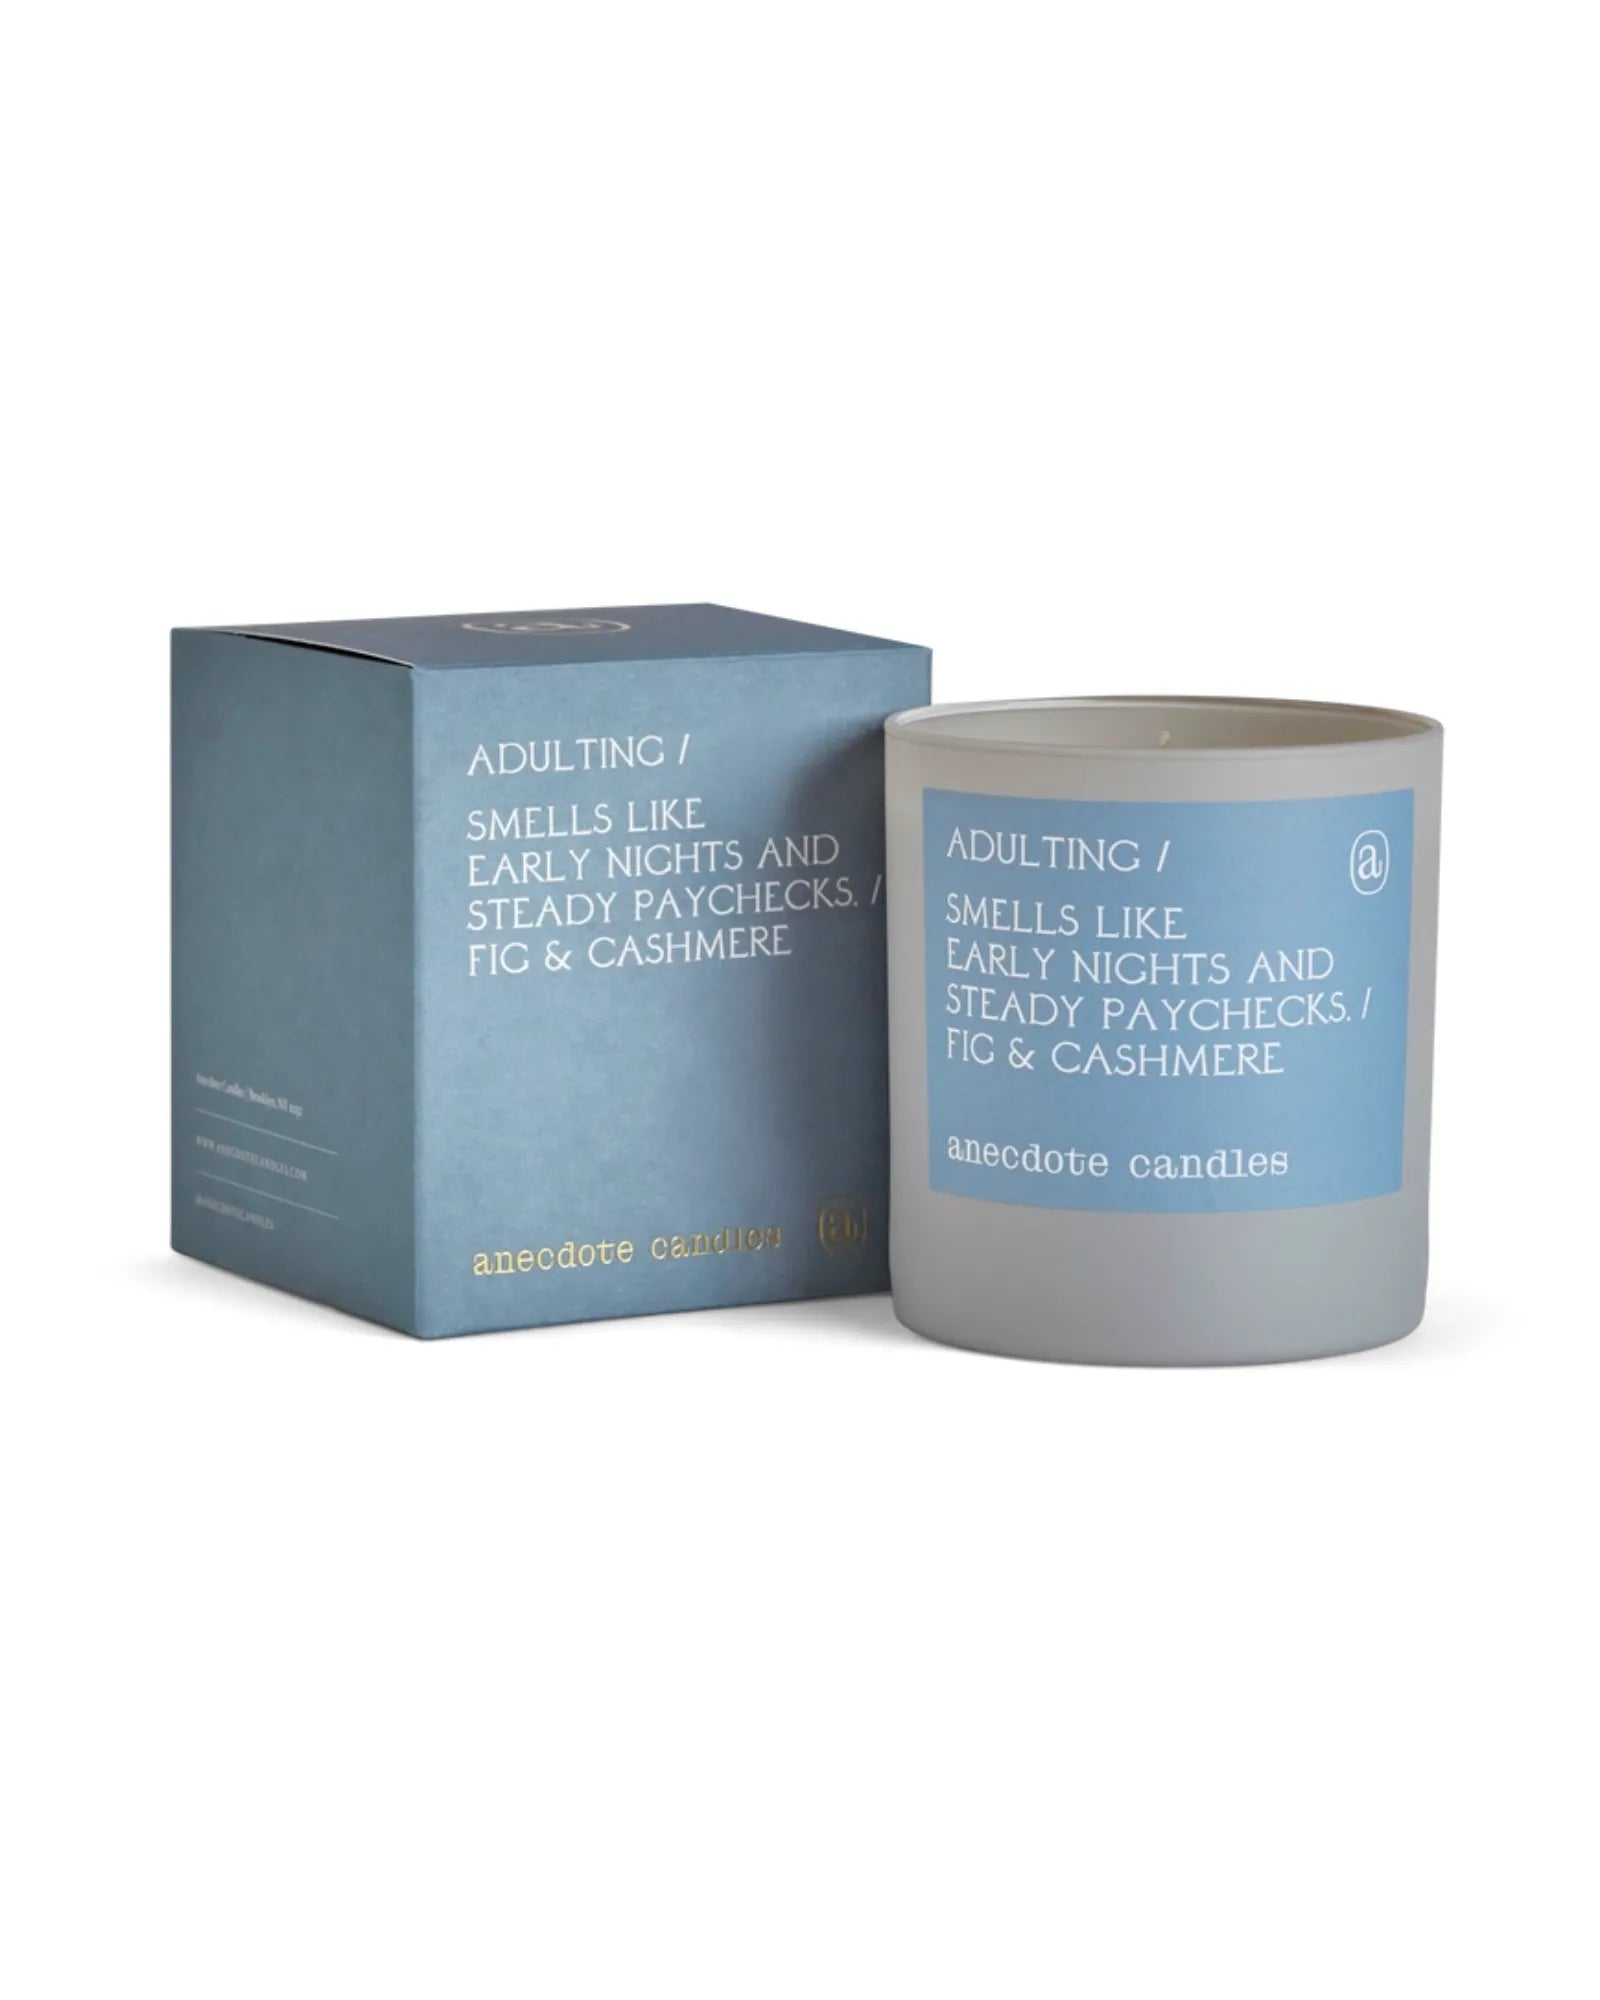 Adulting (Fig & Cashmere) 9 oz Candle